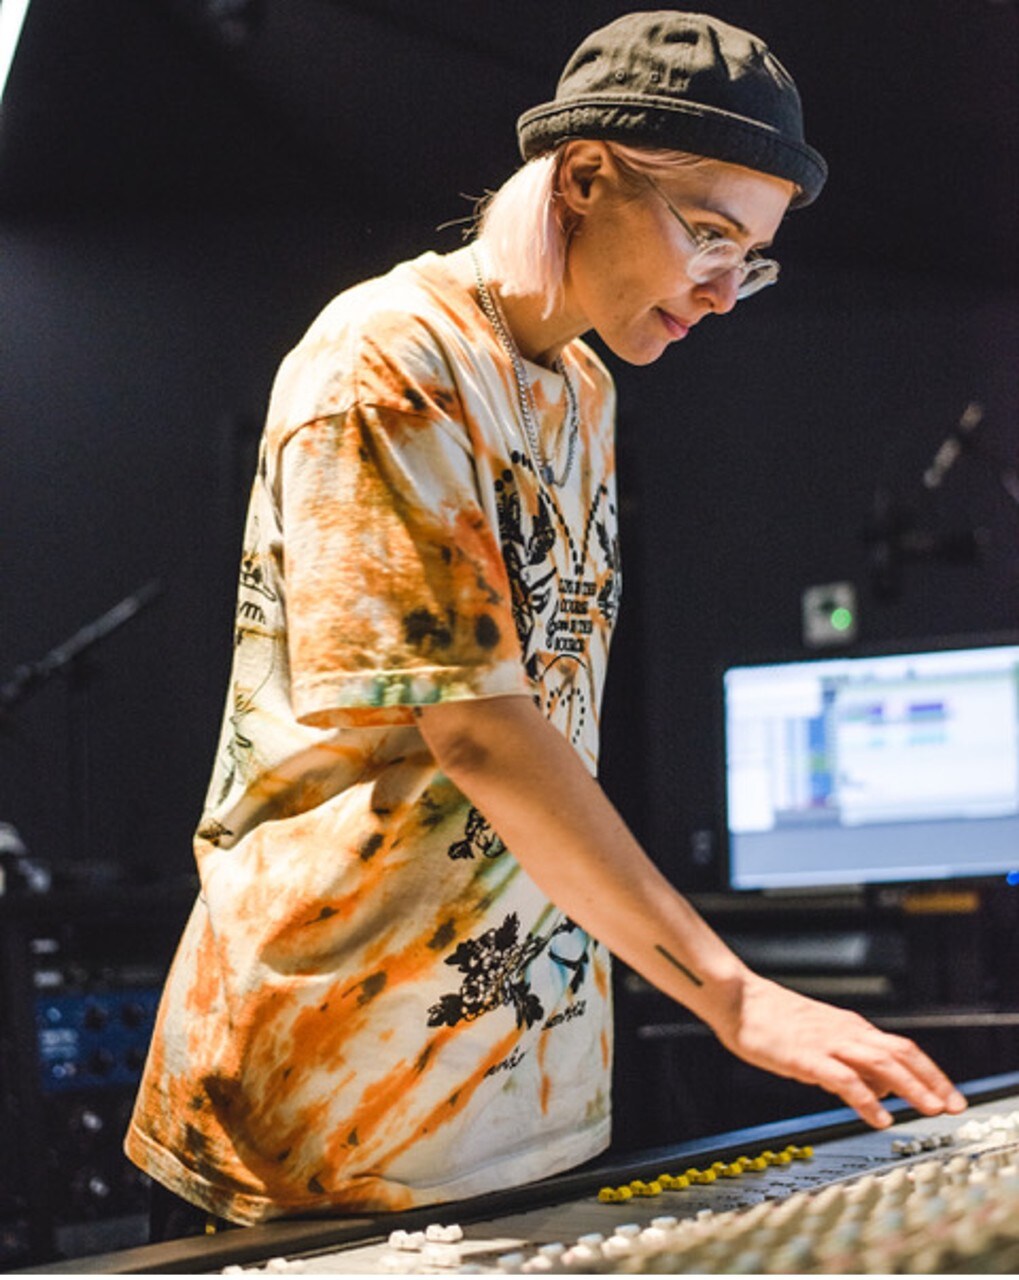 Jane Arnison photographed in a music studio using a sound mixing machine. She wears a tie-dye tshirt, a black bucket hat and clear-rimmed glasses.